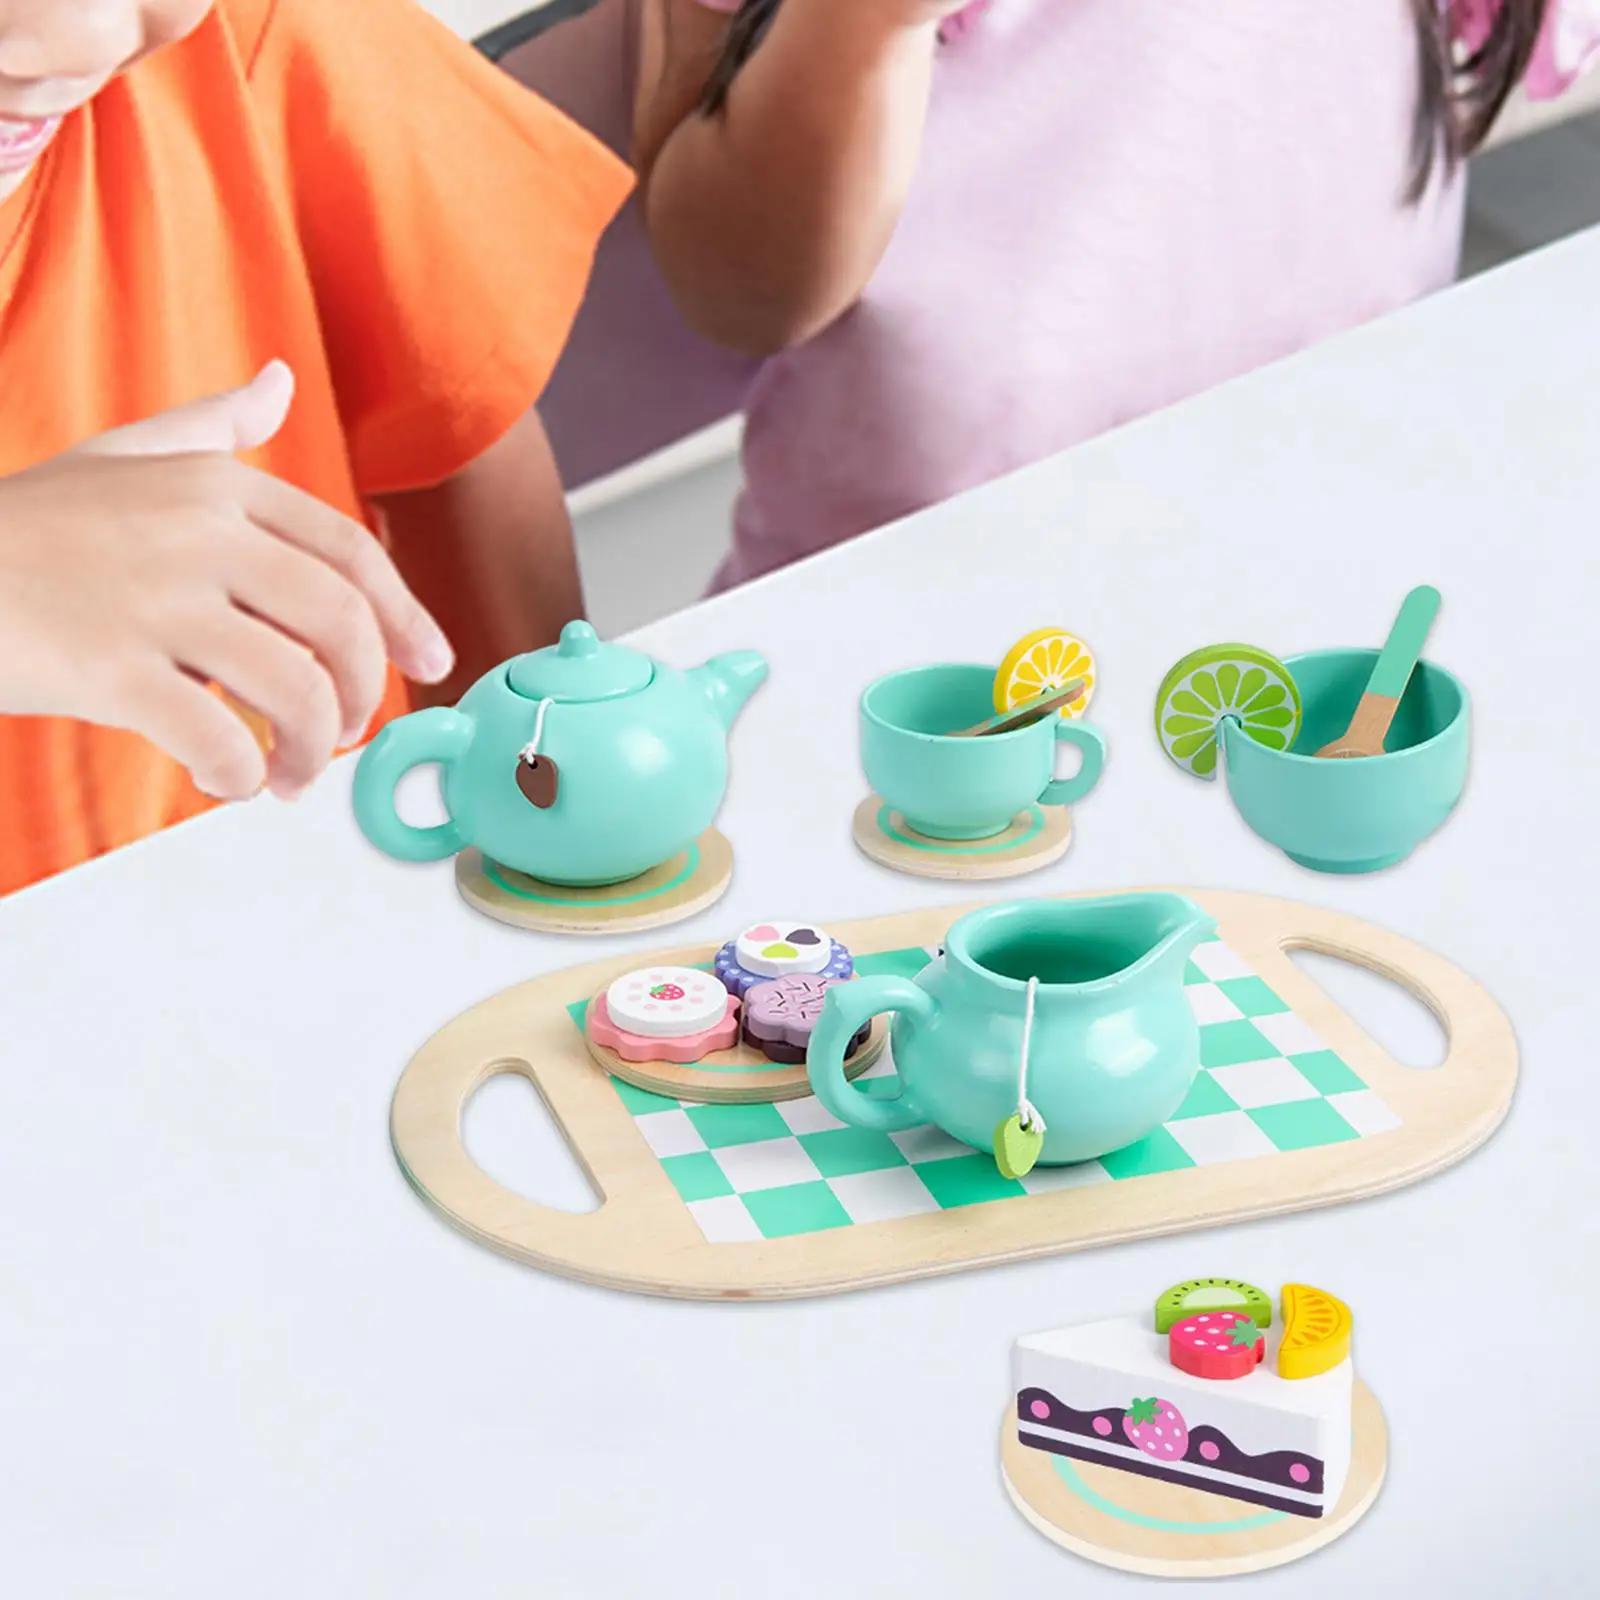 Little Kids Tea Set Toy Kitchen Set Playset Montessori Simulation Realistic Teapot Cups for Ages 3 4 5 Years Old Party Favors